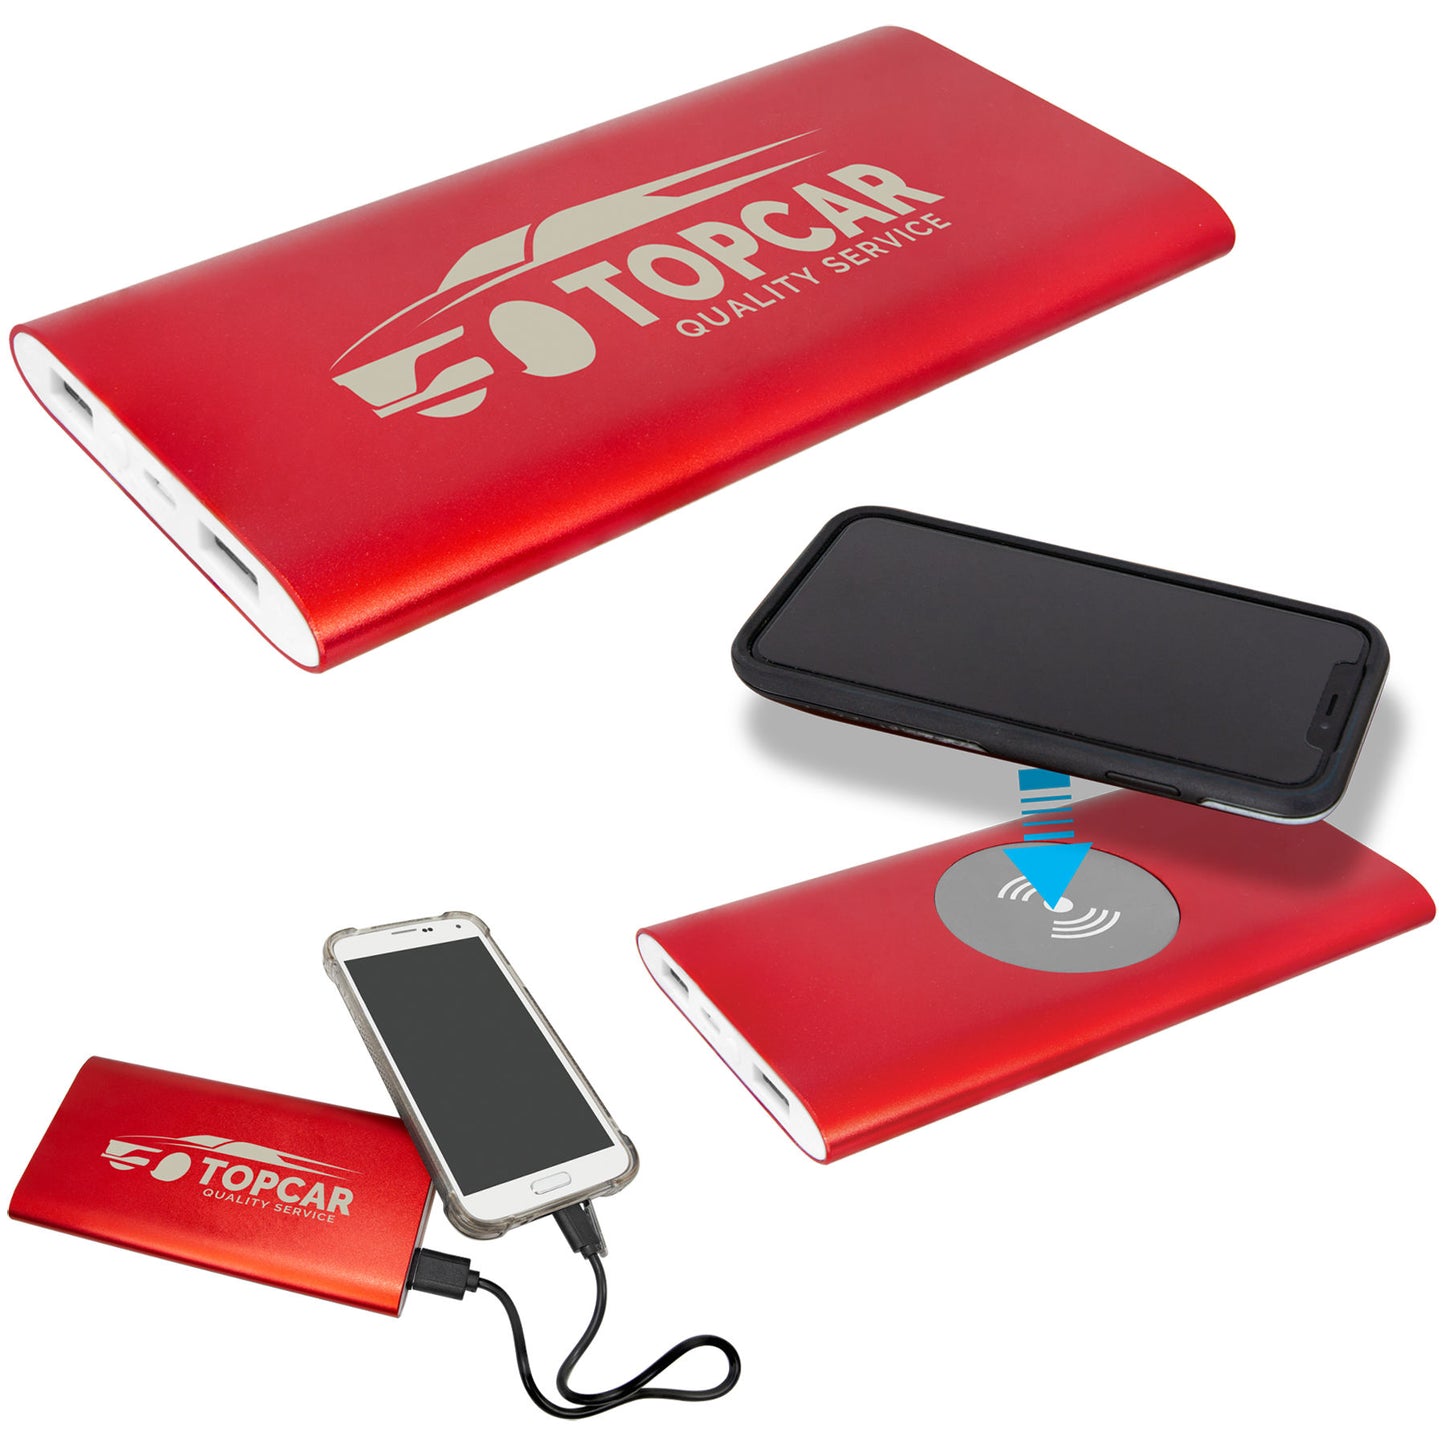 Wireless Power Bank Plug-in or Wireless Charging